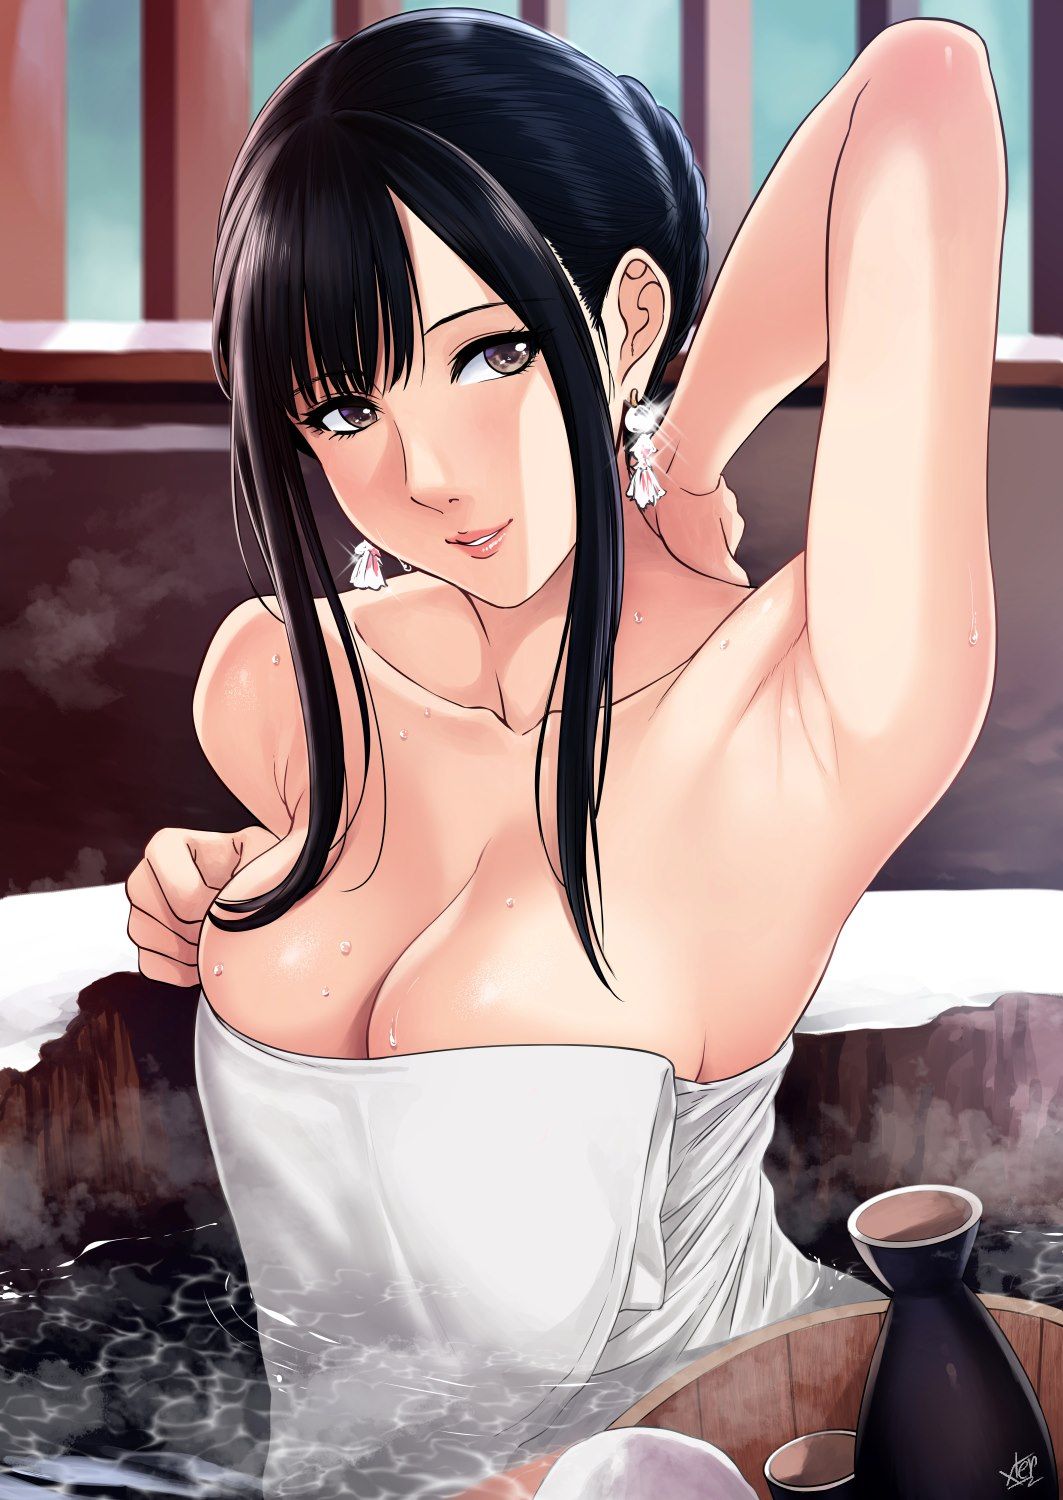 【Secondary】Erotic image of a girl taking a bath Part 12 3